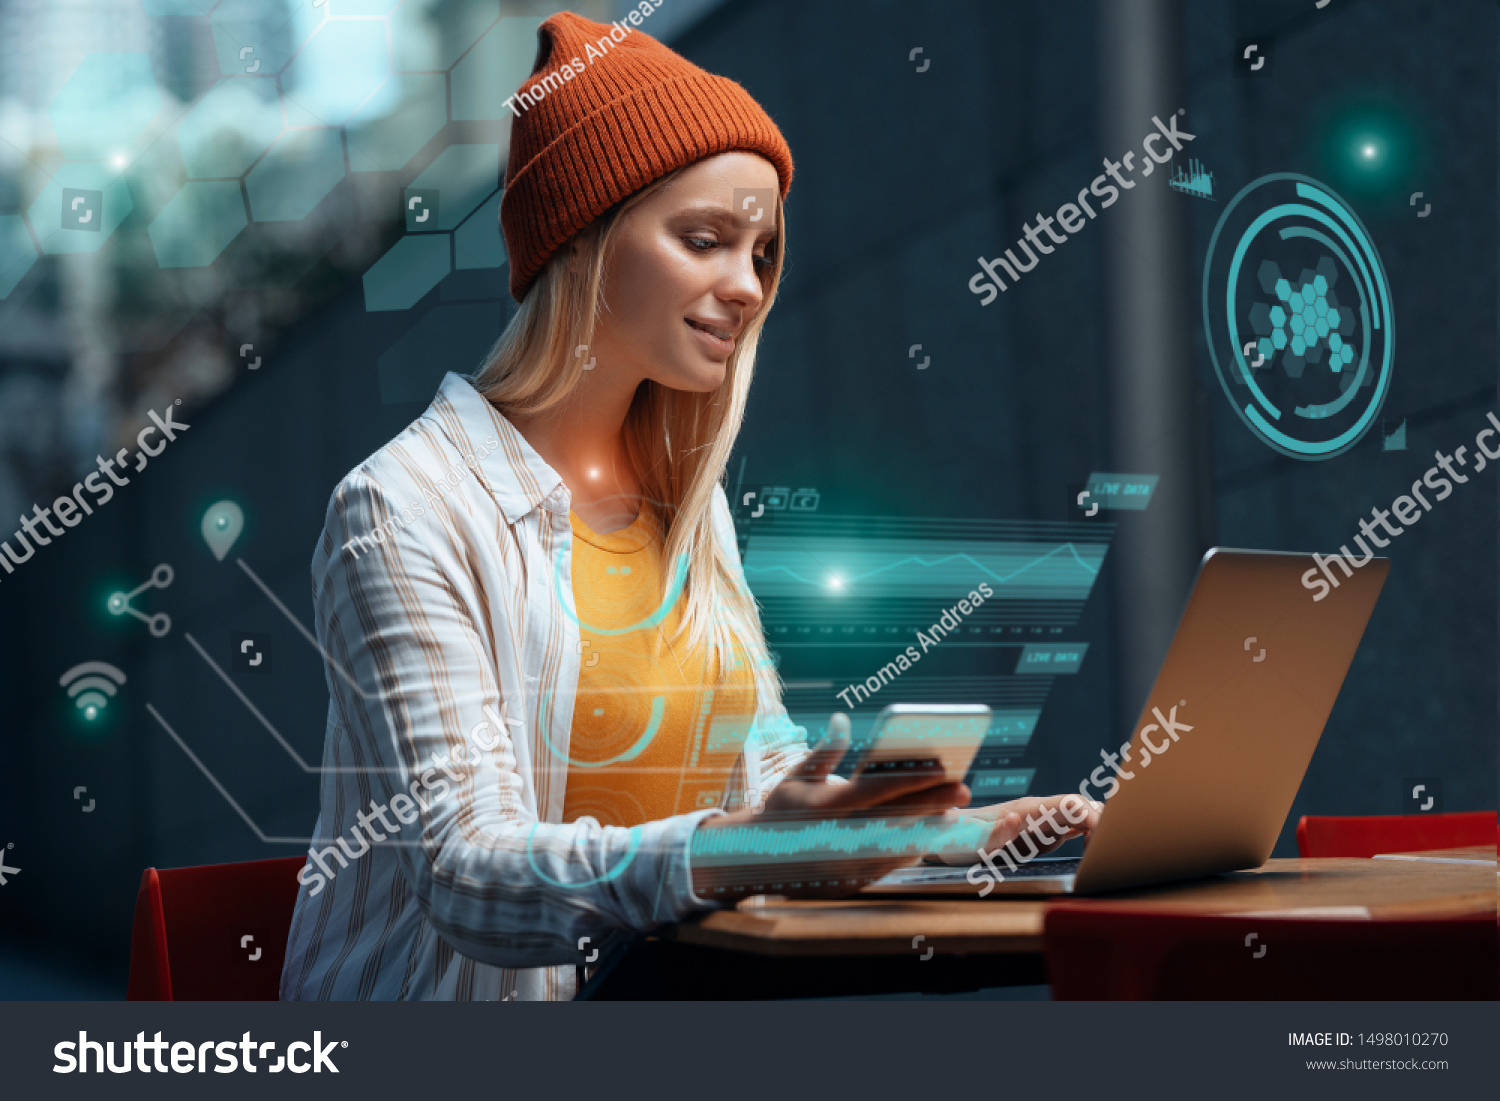 Freelancers of the future could be working with a digital HUD around them. A millennial young woman is working with her laptop and phone in a cafe, while a holographic projection encircles her. #1498010270